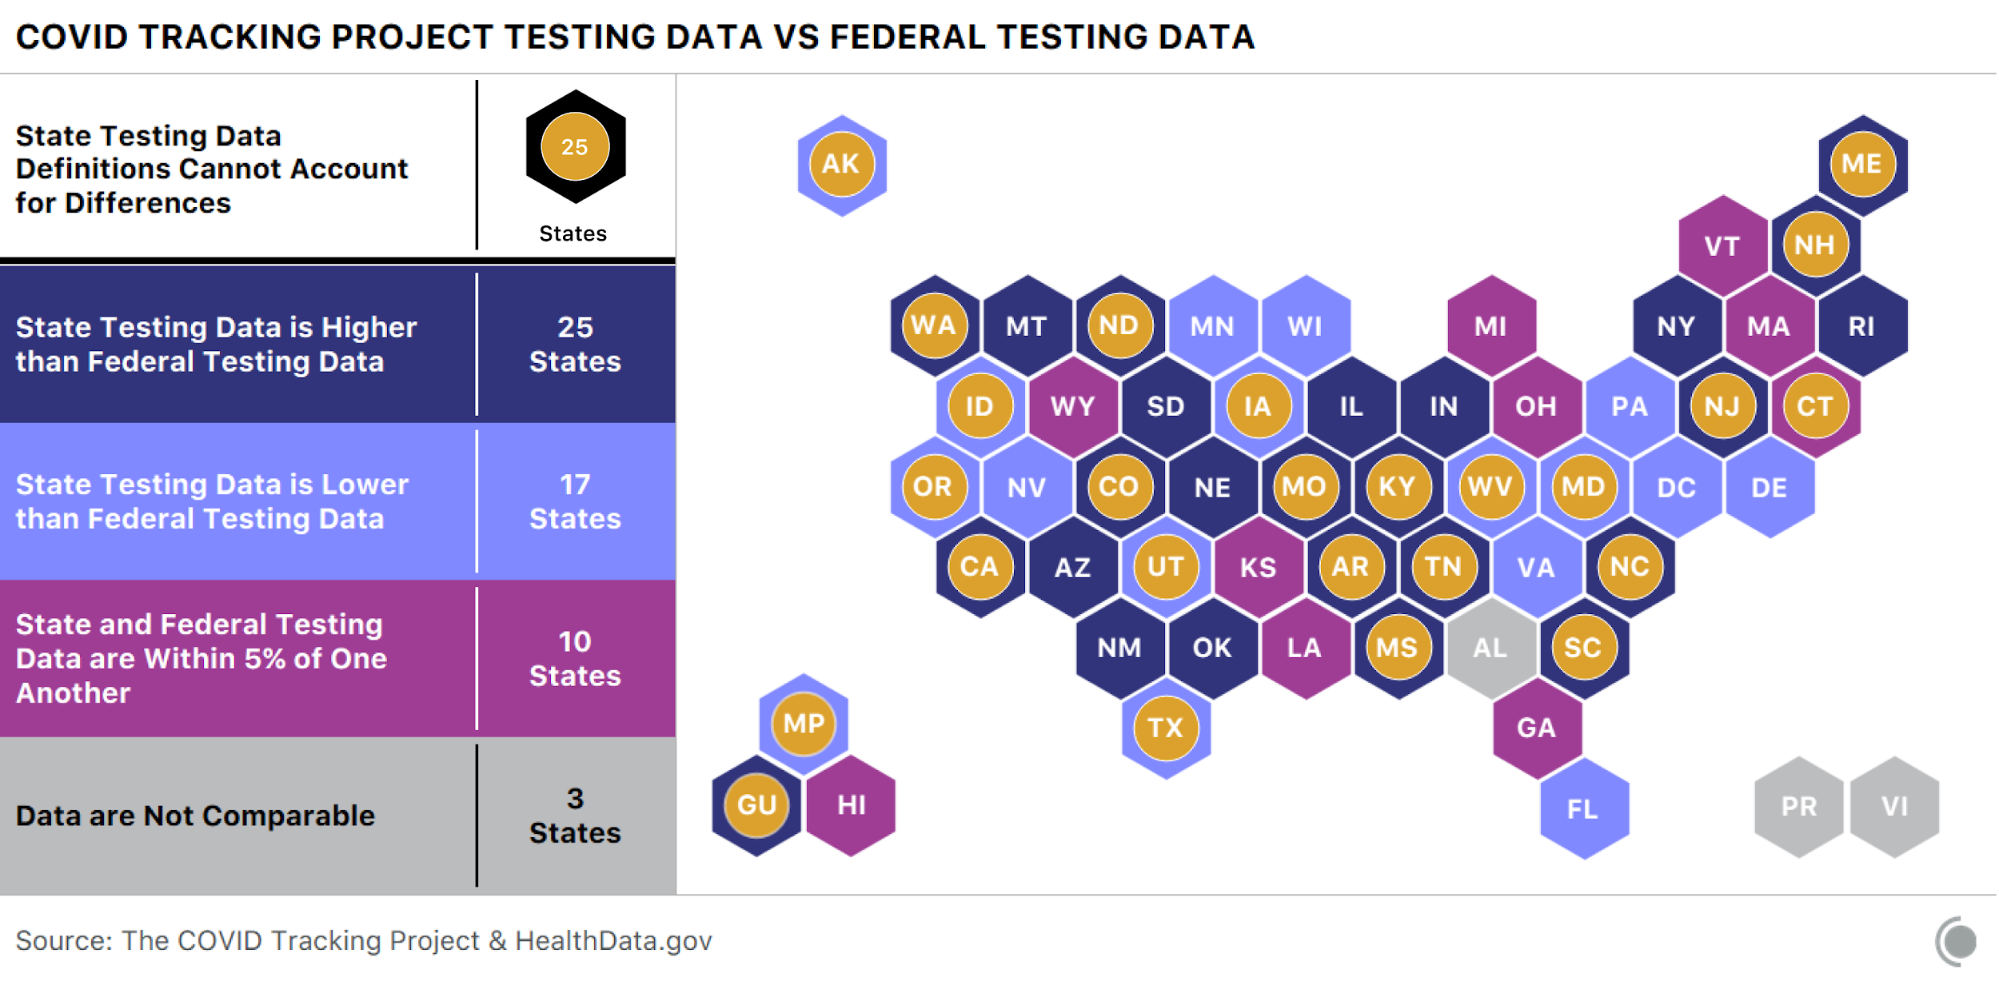 Cartogram of US states showing the difference between CTP and federal testing data by state. 25 states have significant, unexplained differences between the two data sets.